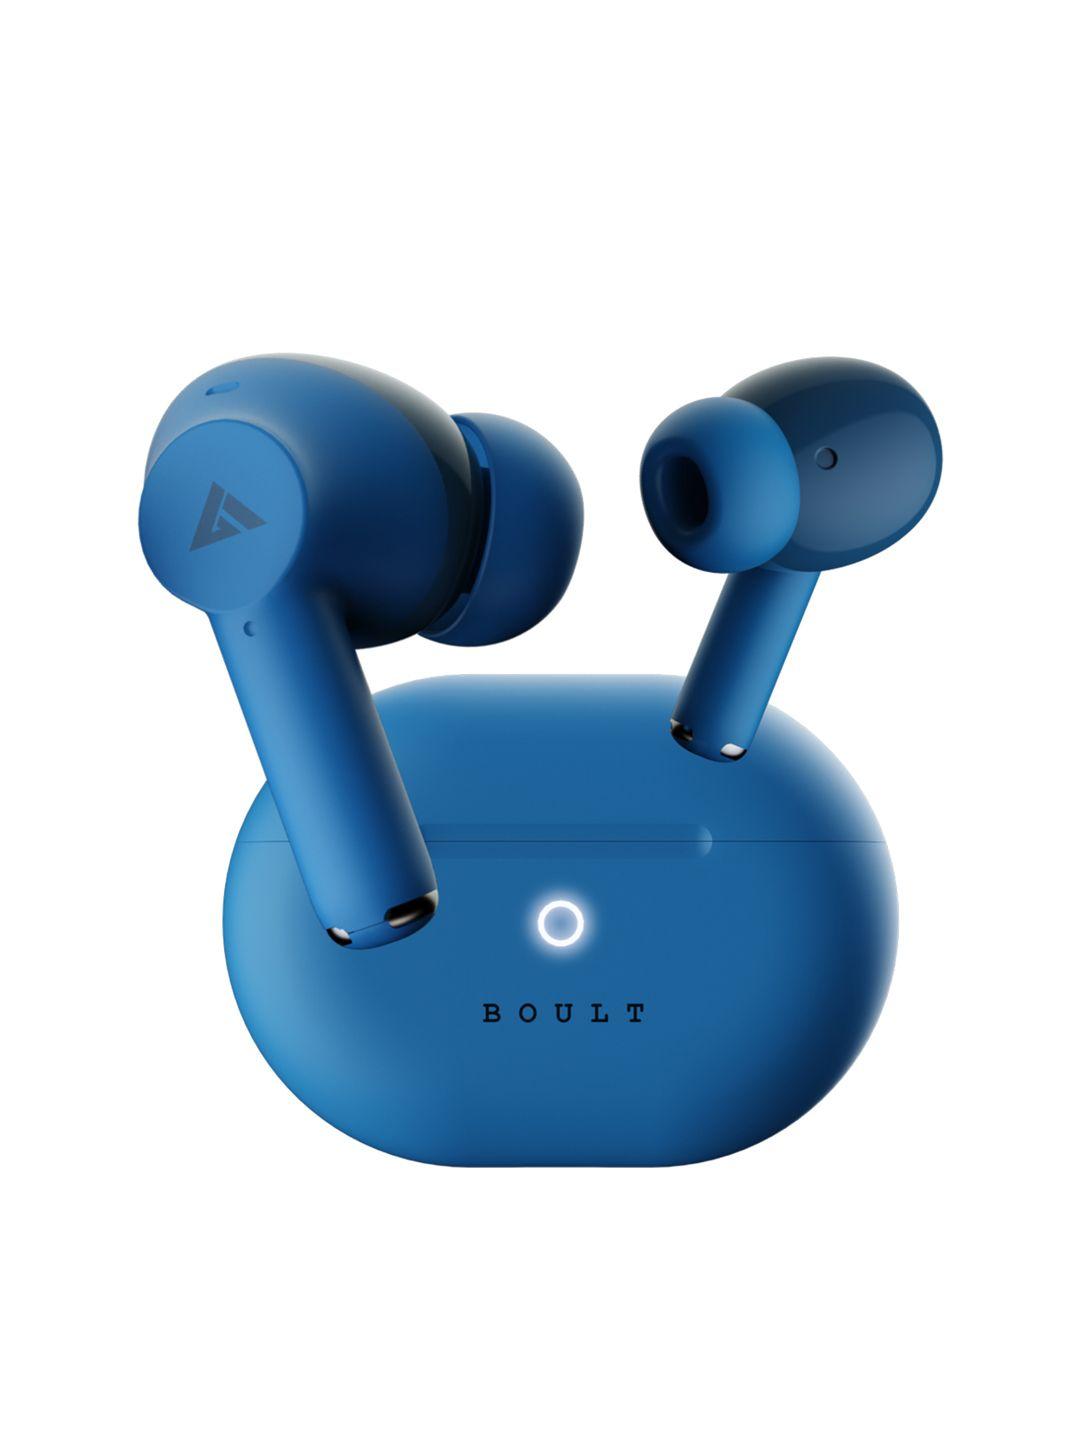 boult audio blue airbass w40 earbuds with quad mic enc & 48 hrs battery life